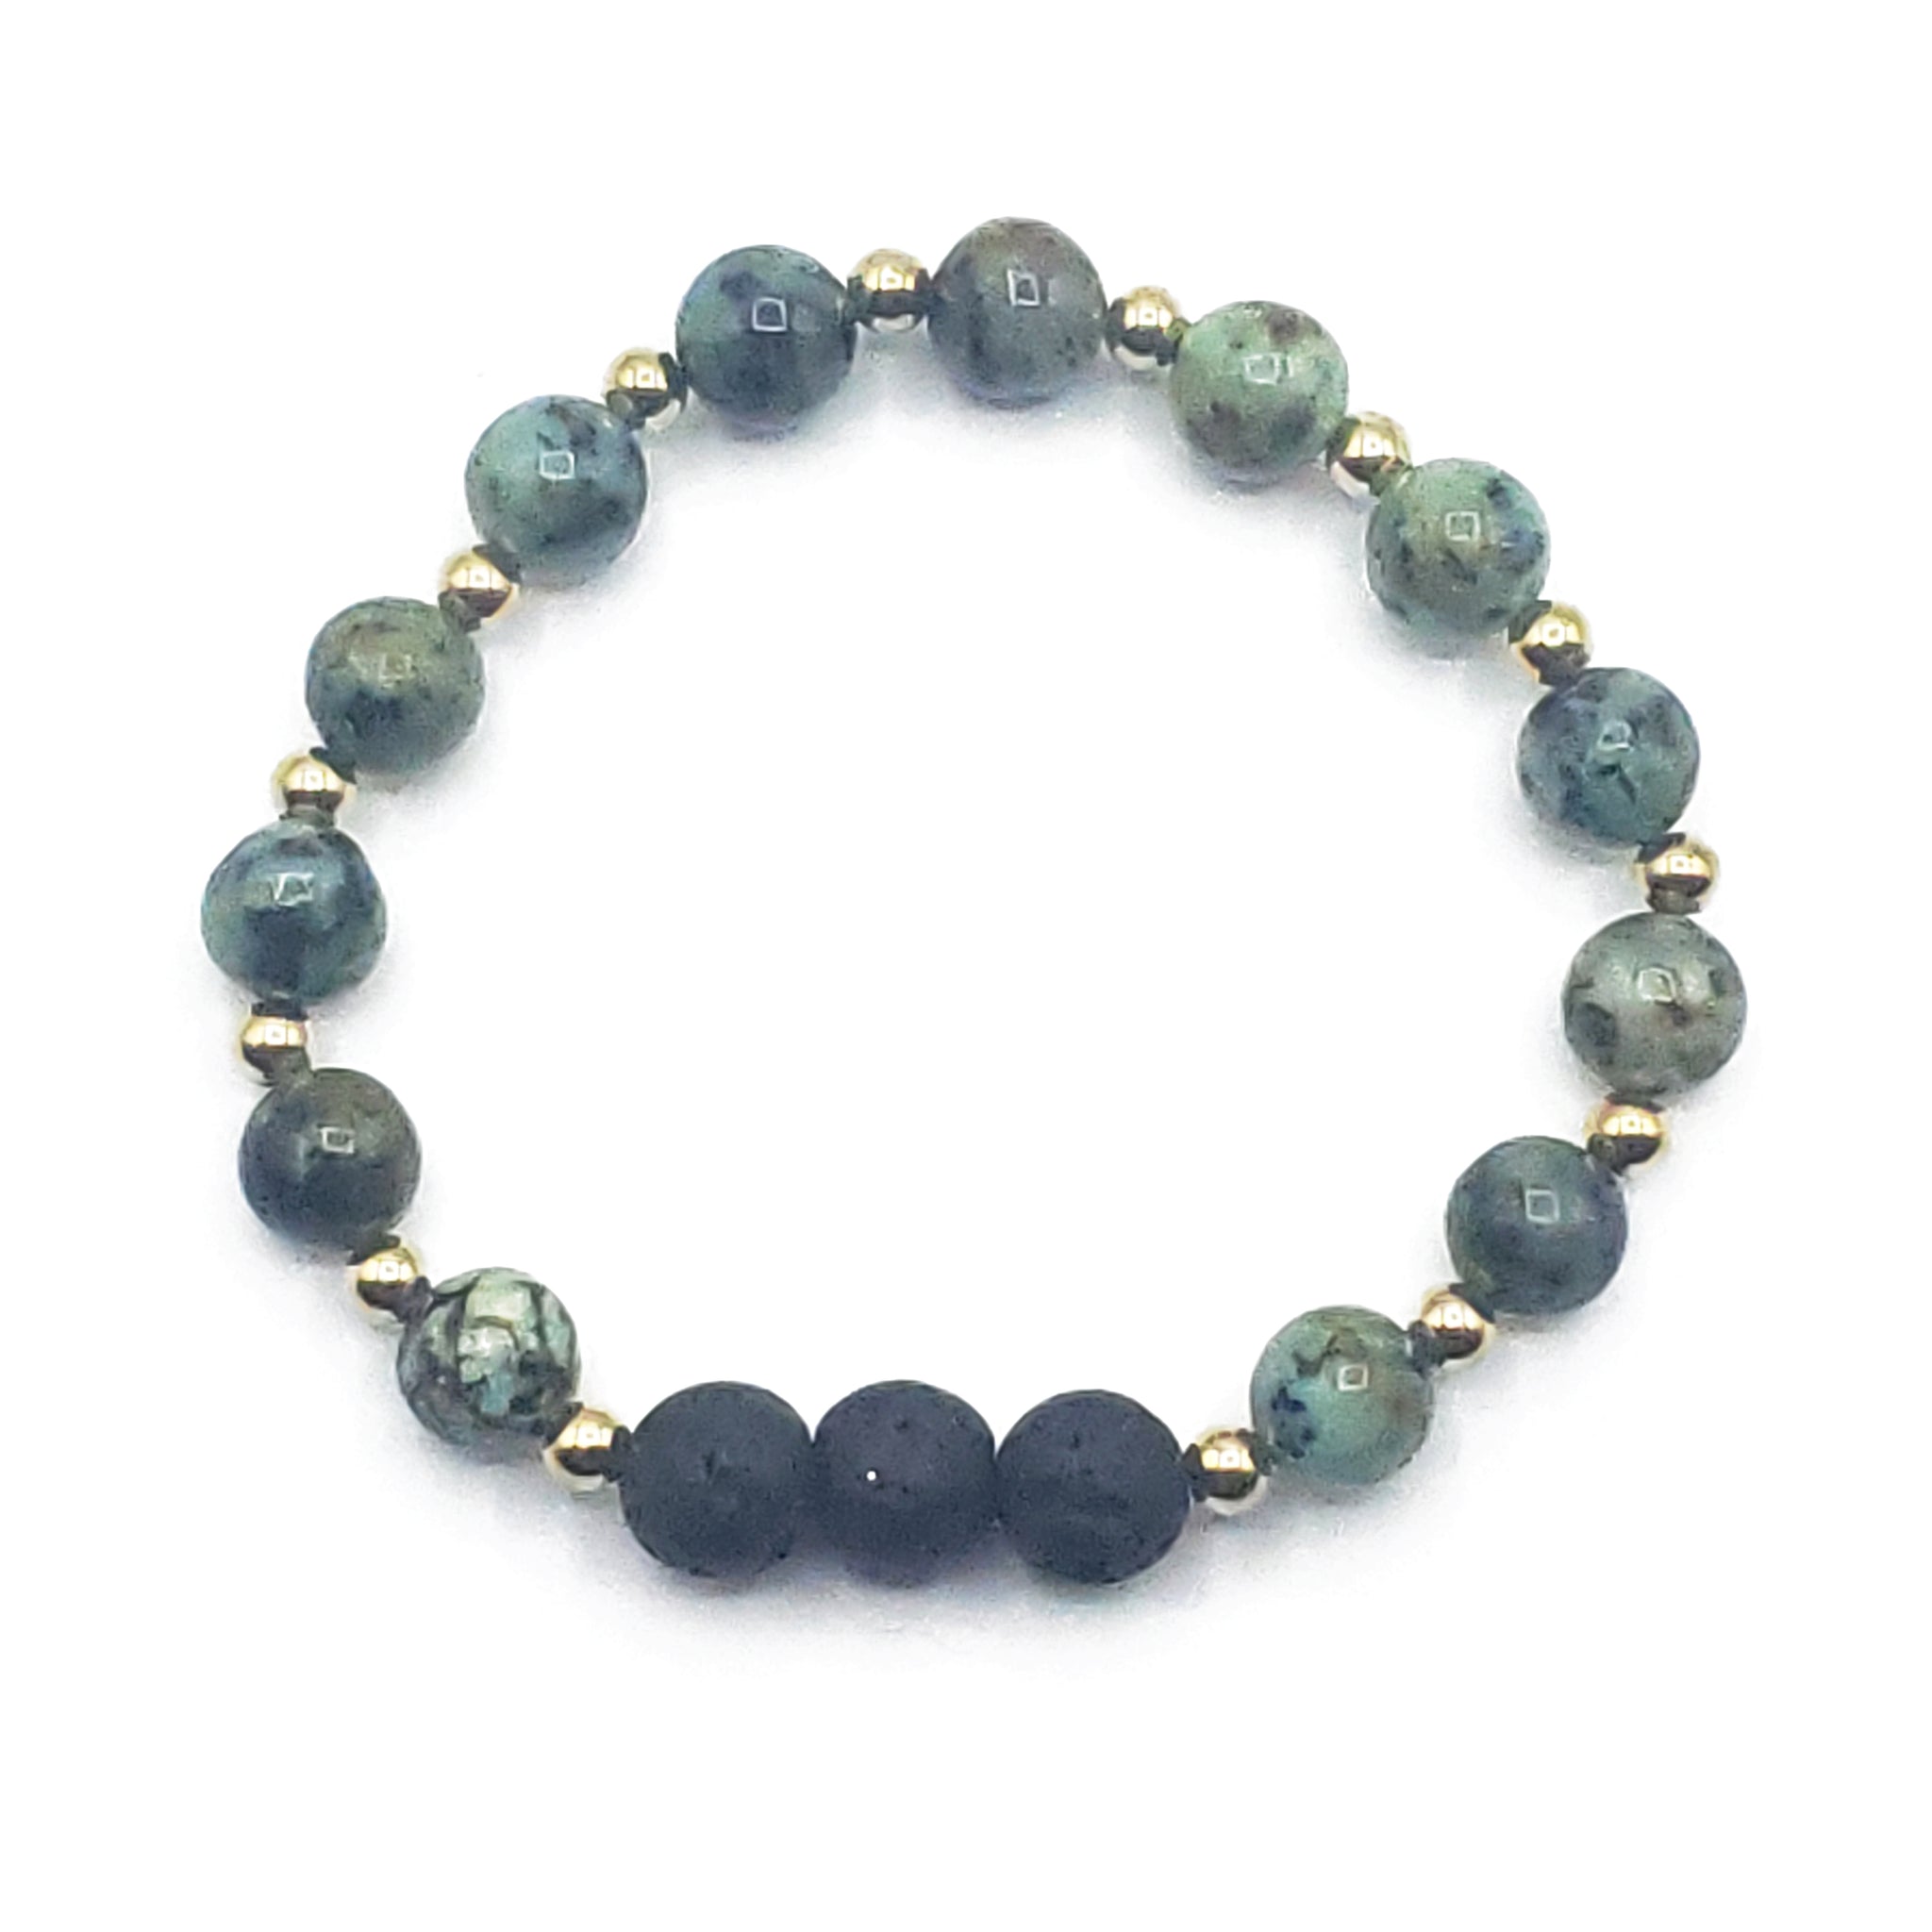 African Turquoise Diffuser Bracelet.